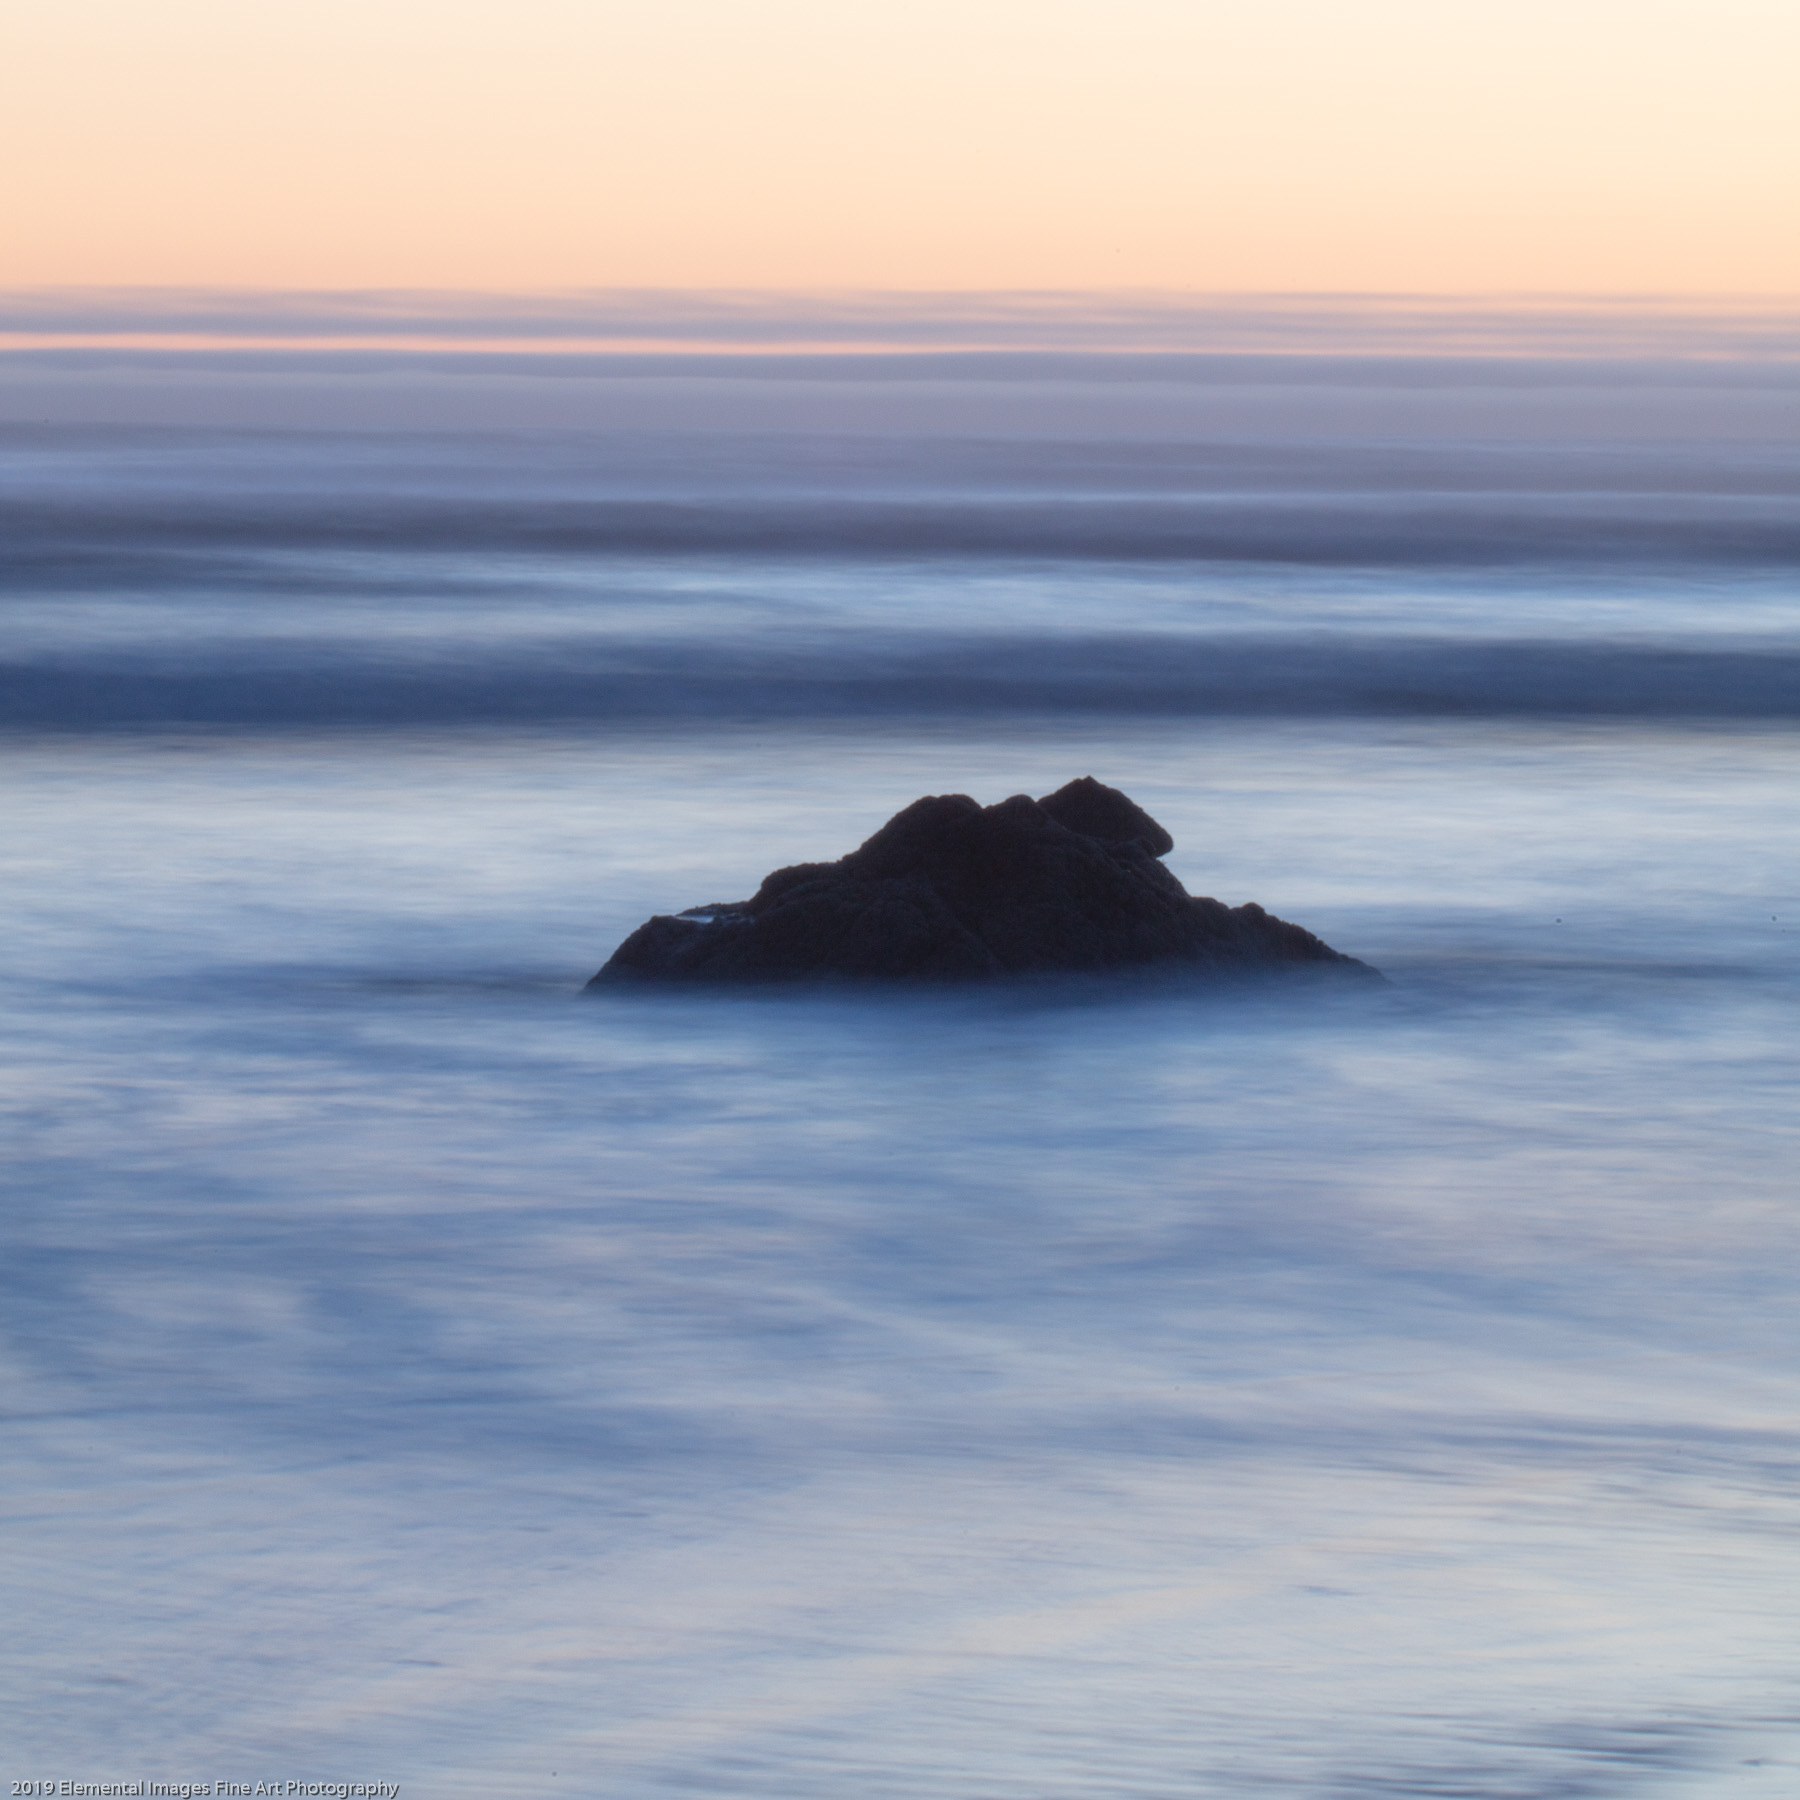 Zen Rocks #15 | Bandon | OR | USA - © 2019 Elemental Images Fine Art Photography - All Rights Reserved Worldwide